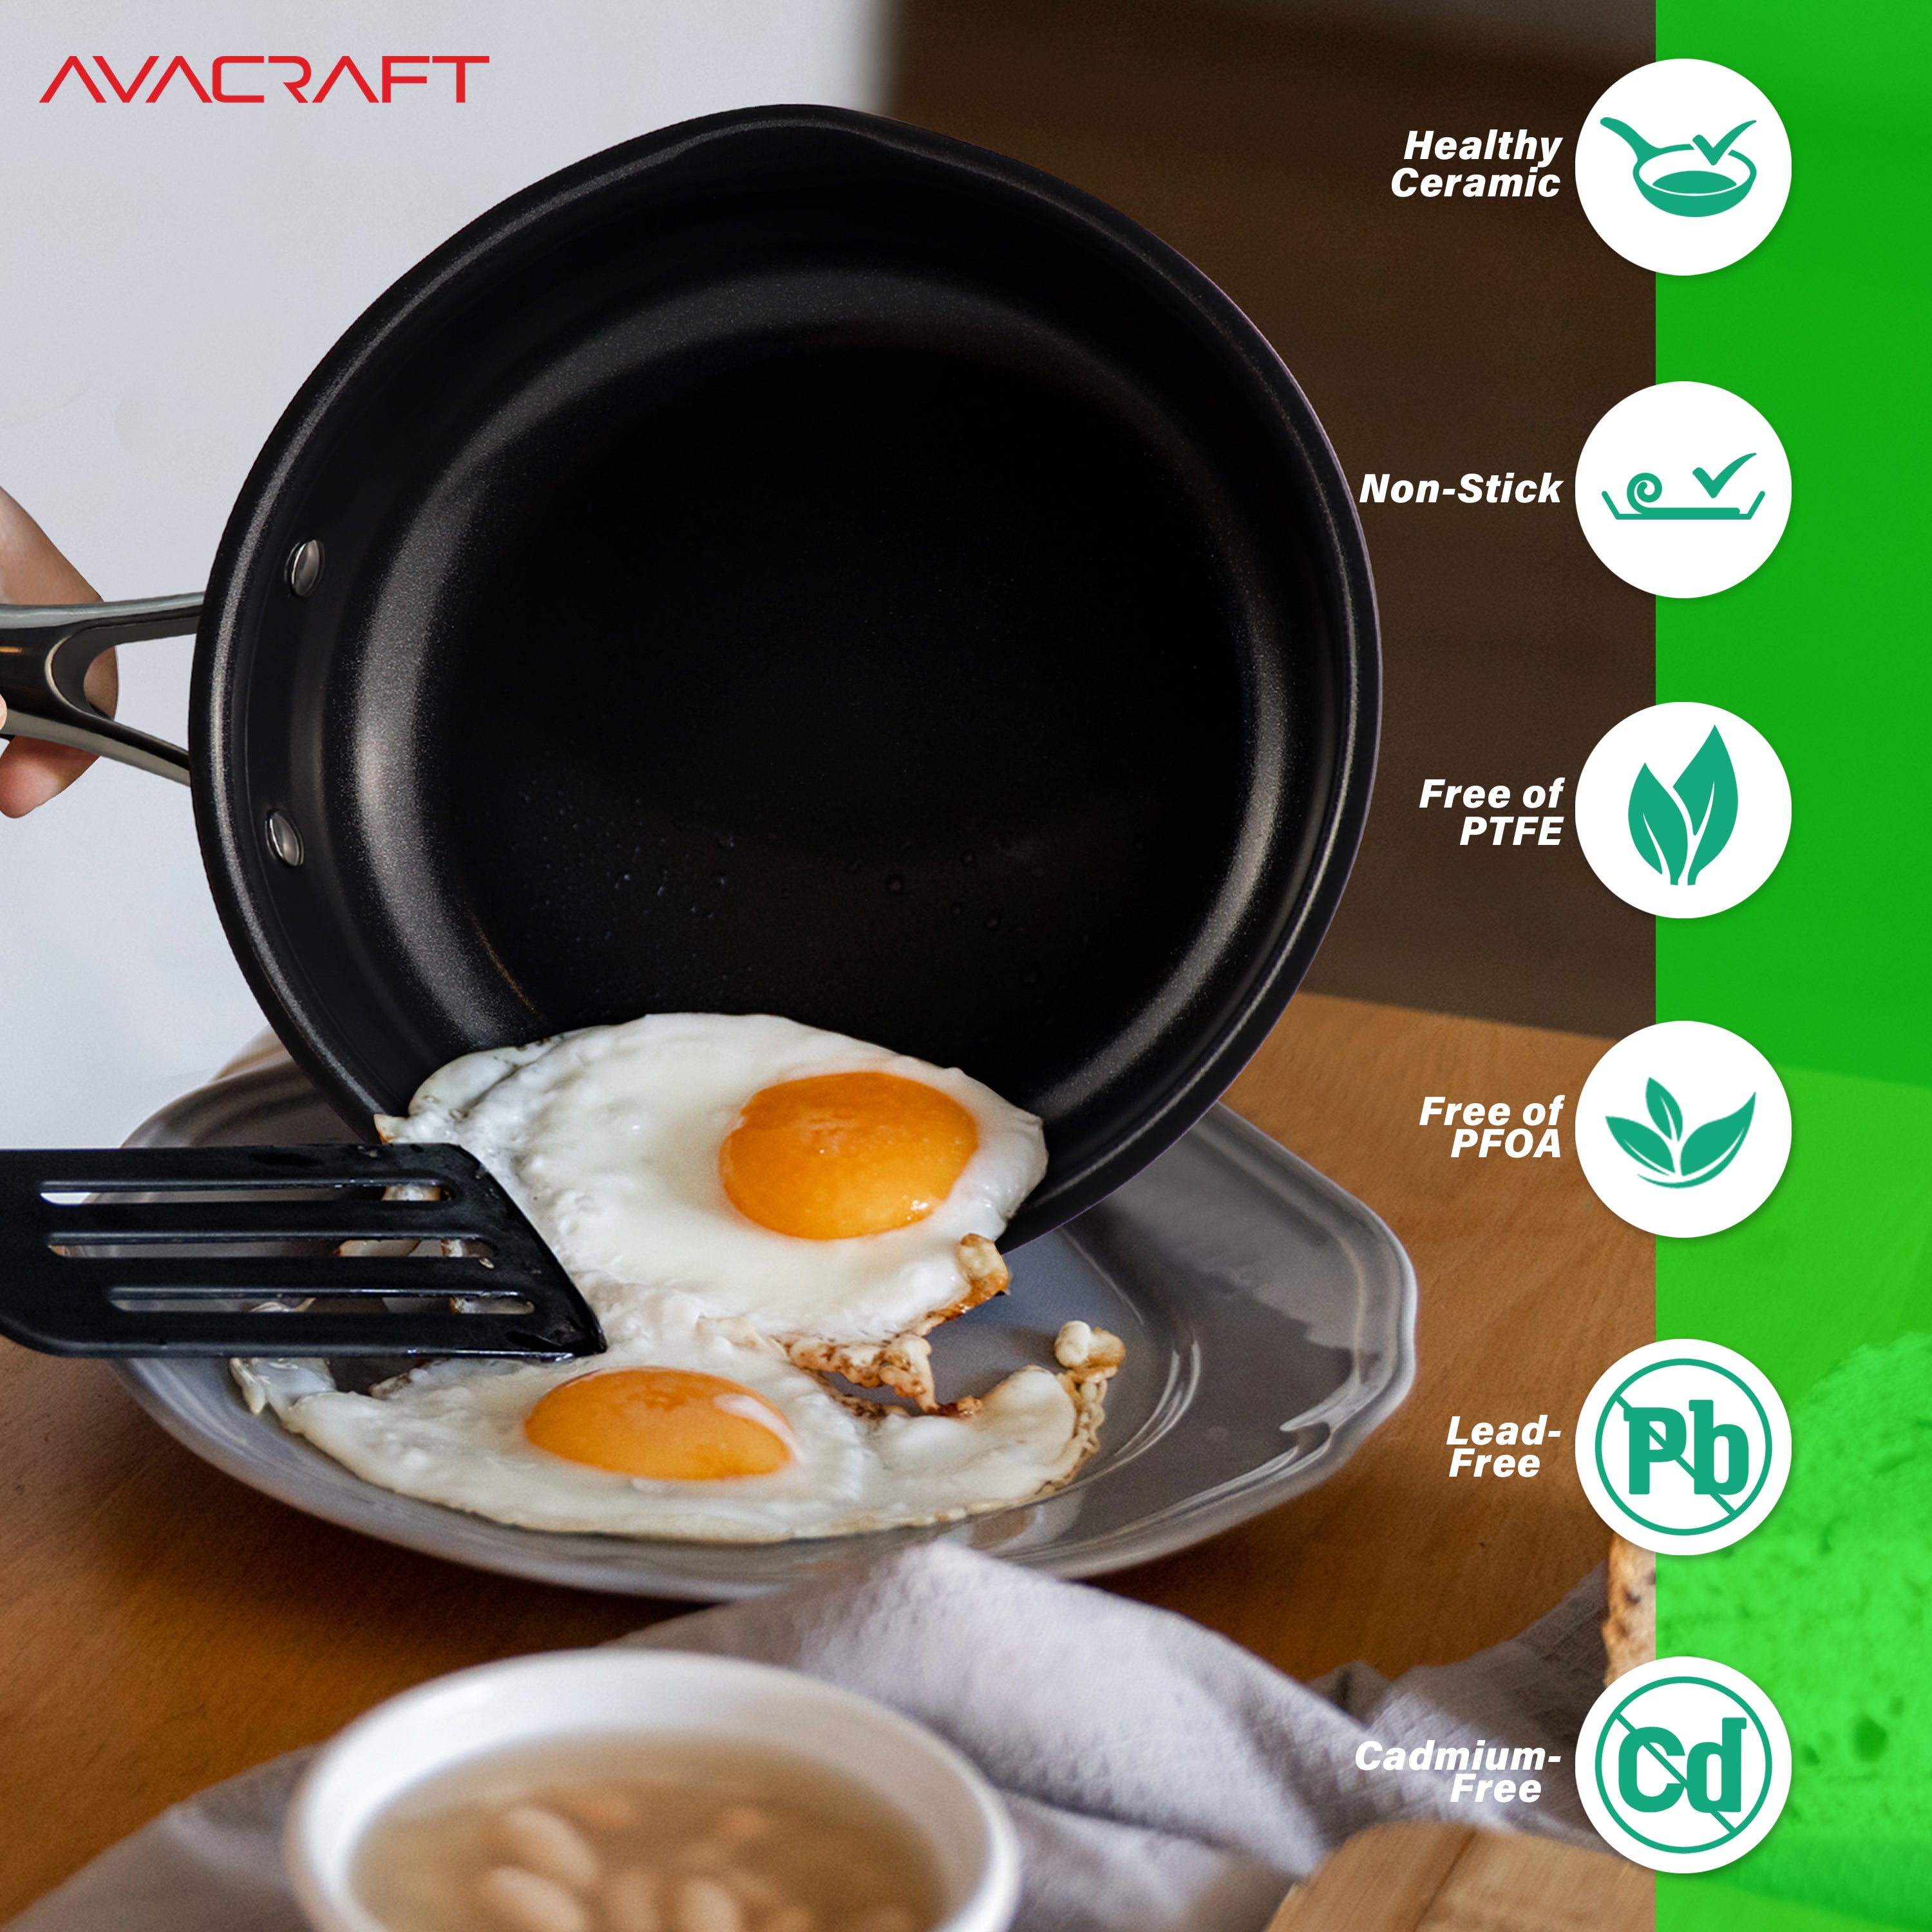 Pure Ceramic Cookware This Healthy Kitchen